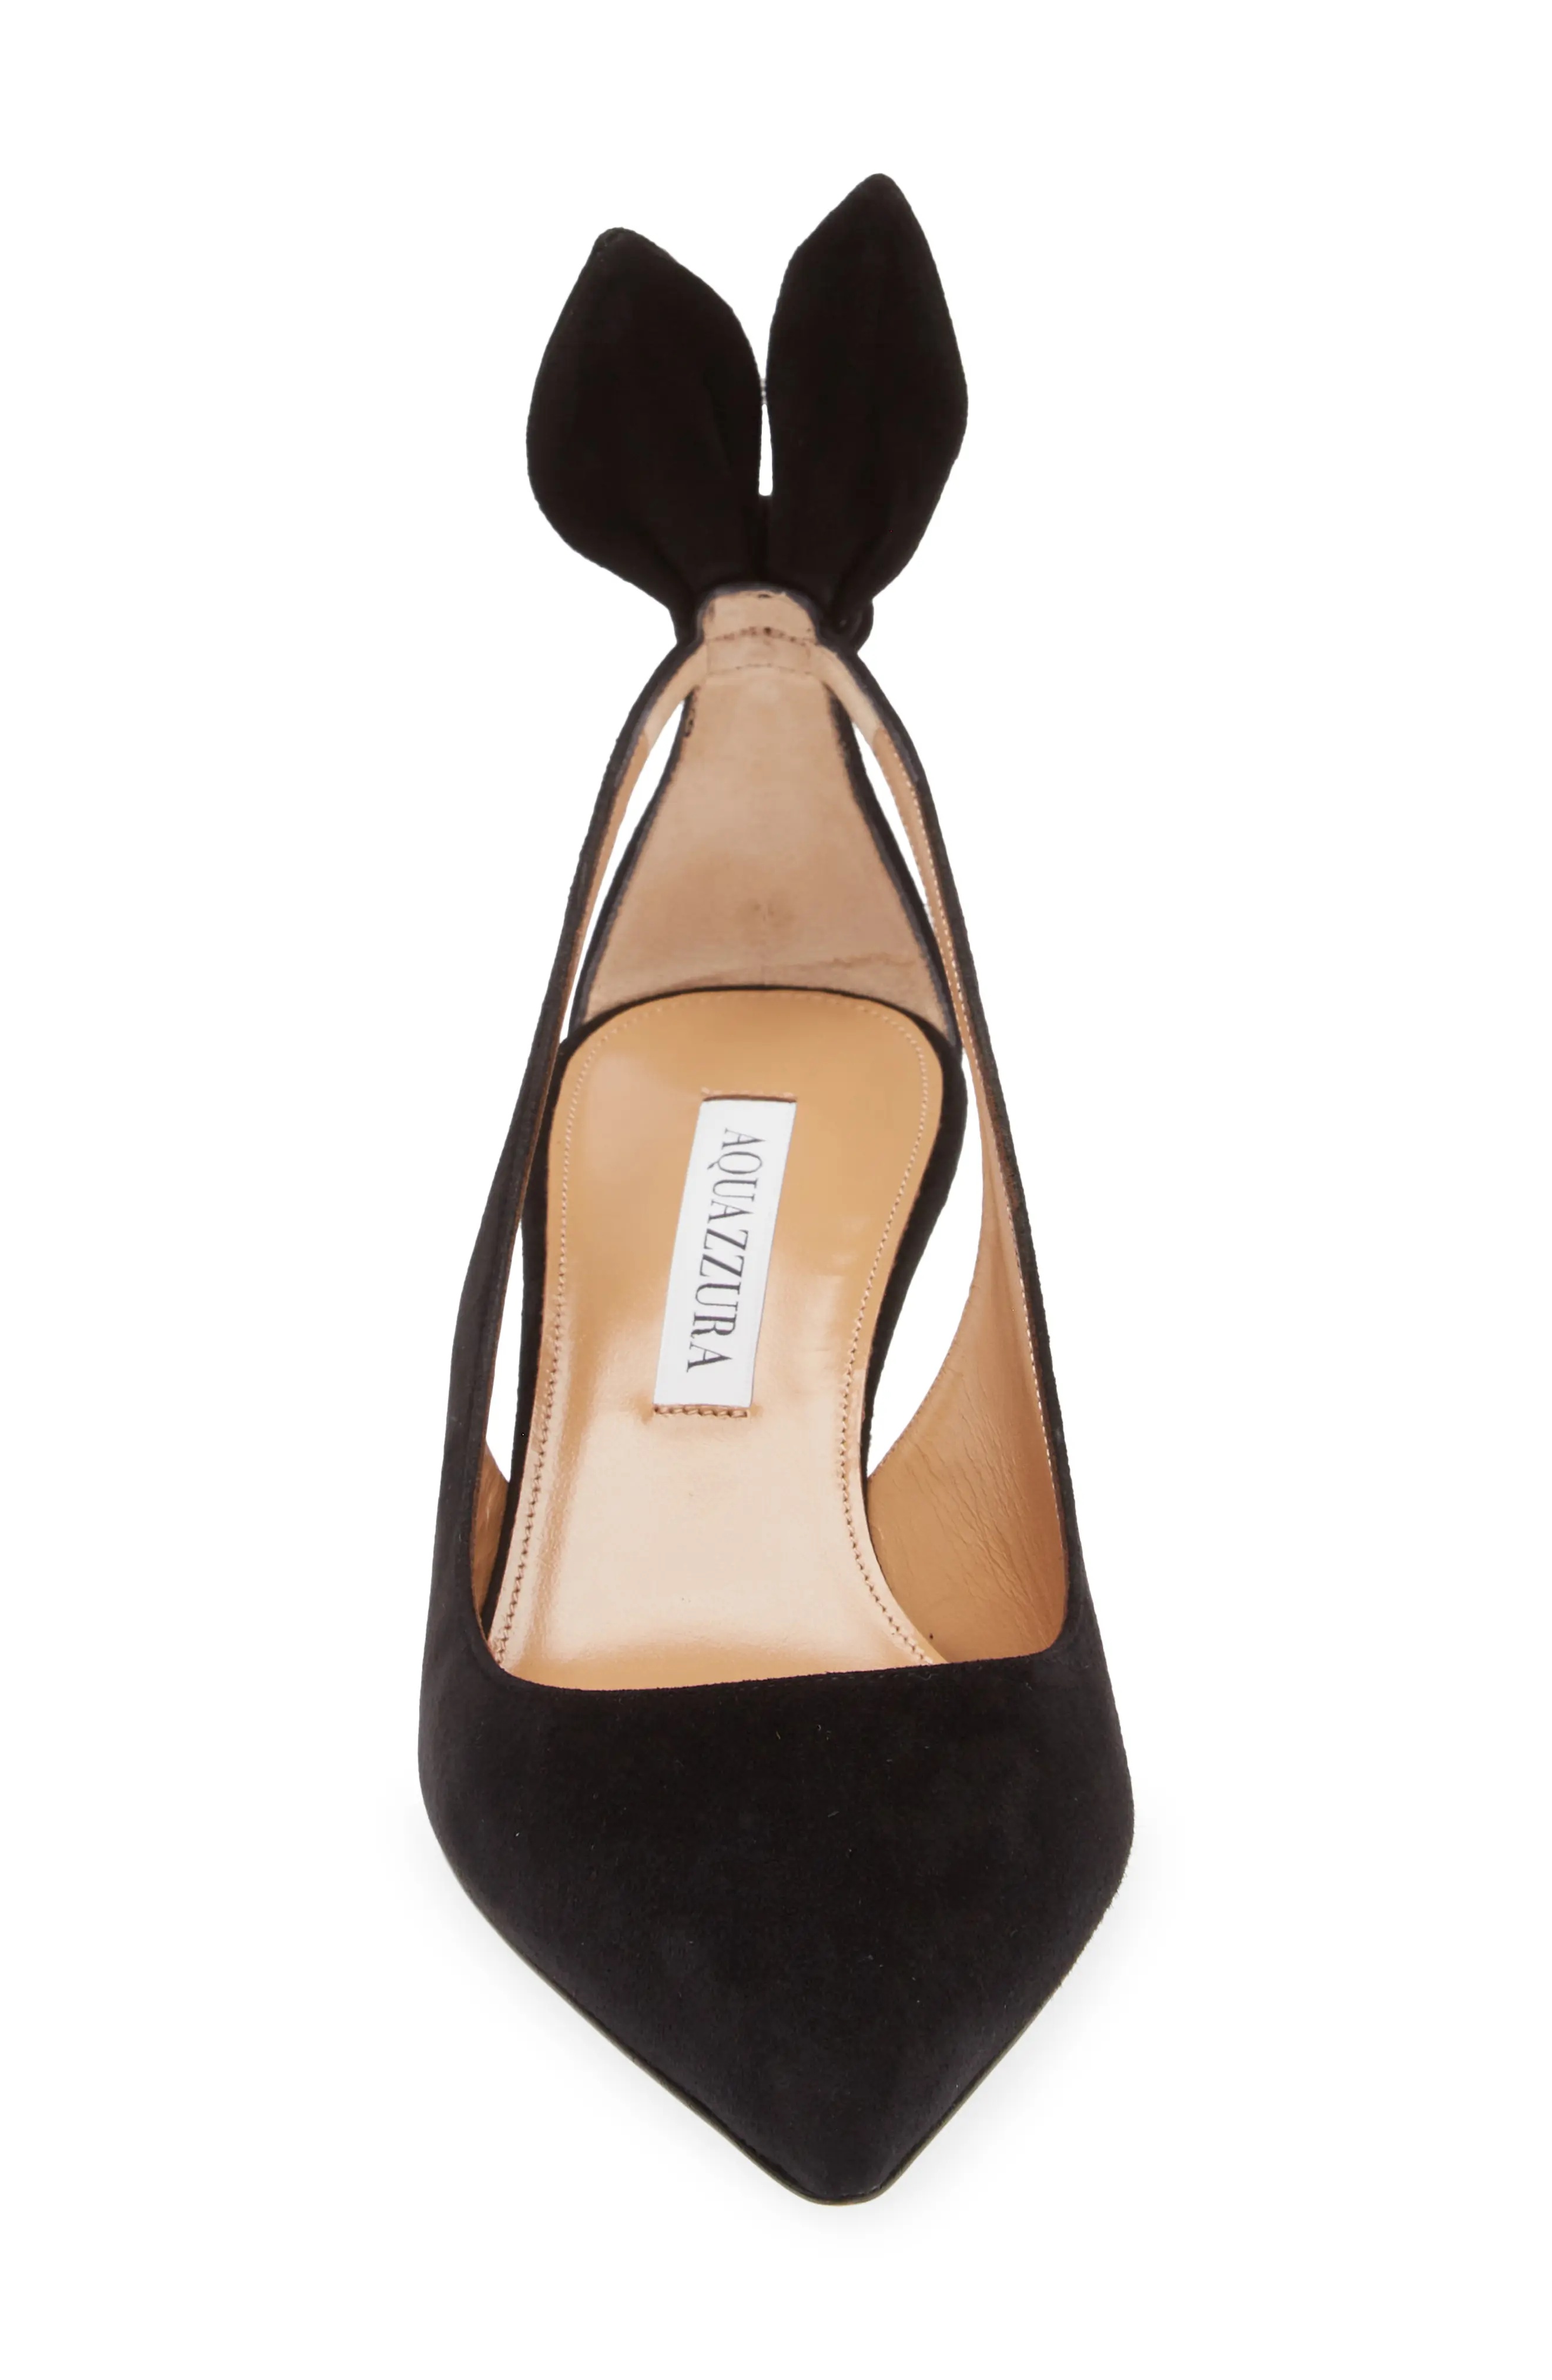 Bow Tie Pointed Toe Pump - 4